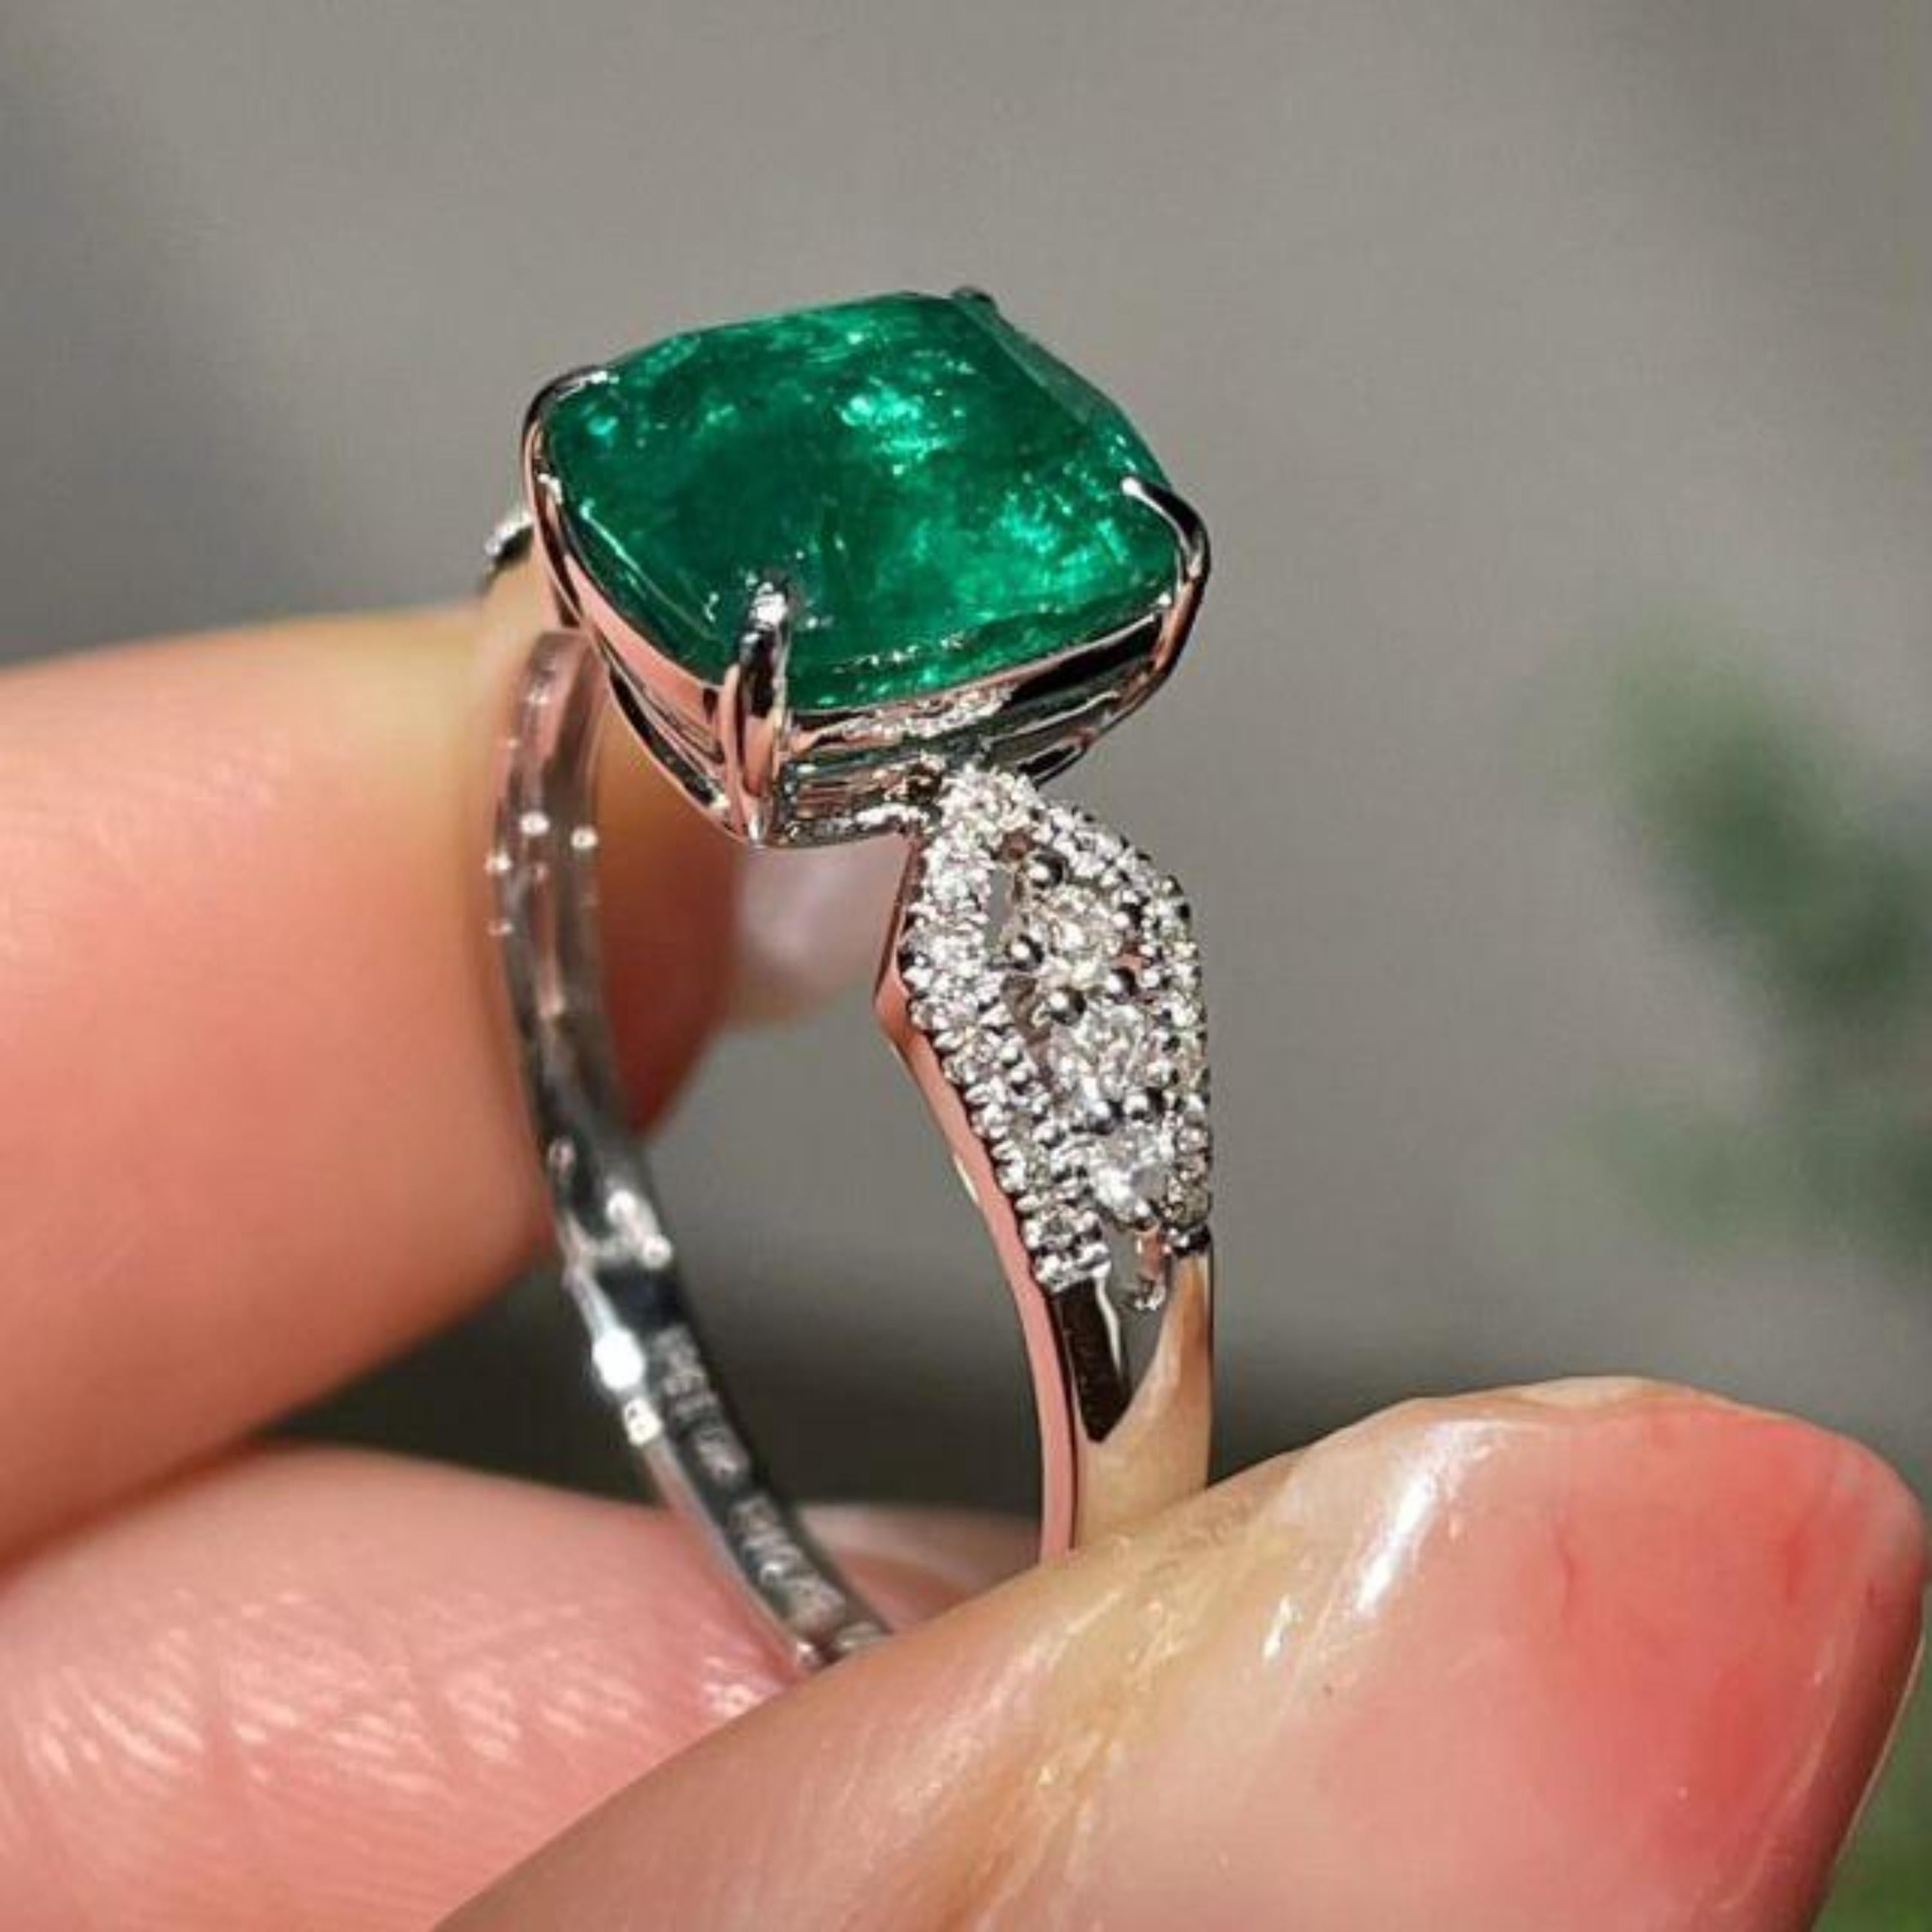 2 Carat Natural Emerald Diamond Engagement Ring Set in 18K Gold, Cocktail Ring

A stunning ring featuring IGI/GIA Certified 2.02 Carat Natural Emerald and 0.28 Carat of Diamond Accents set in 18K Solid Gold.

Emeralds are highly valued for their